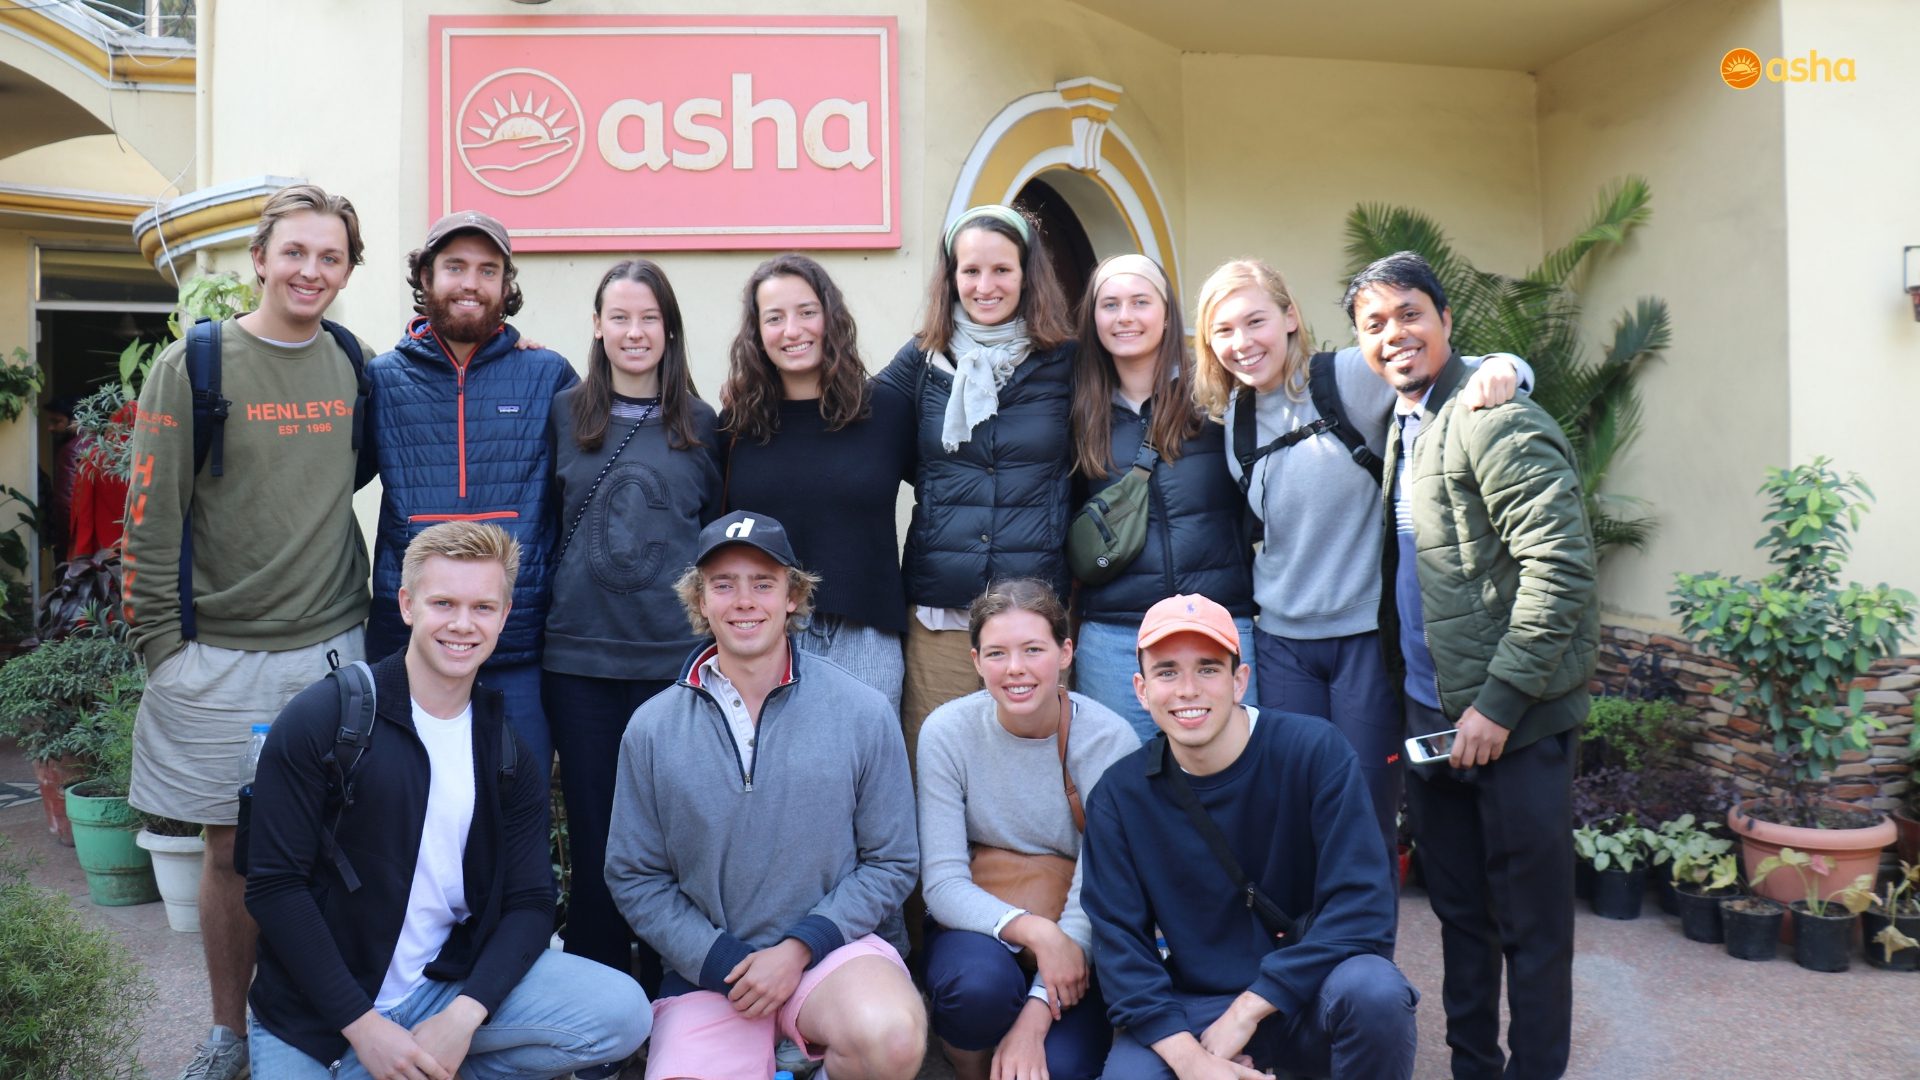 A team from Trinity College visits Asha